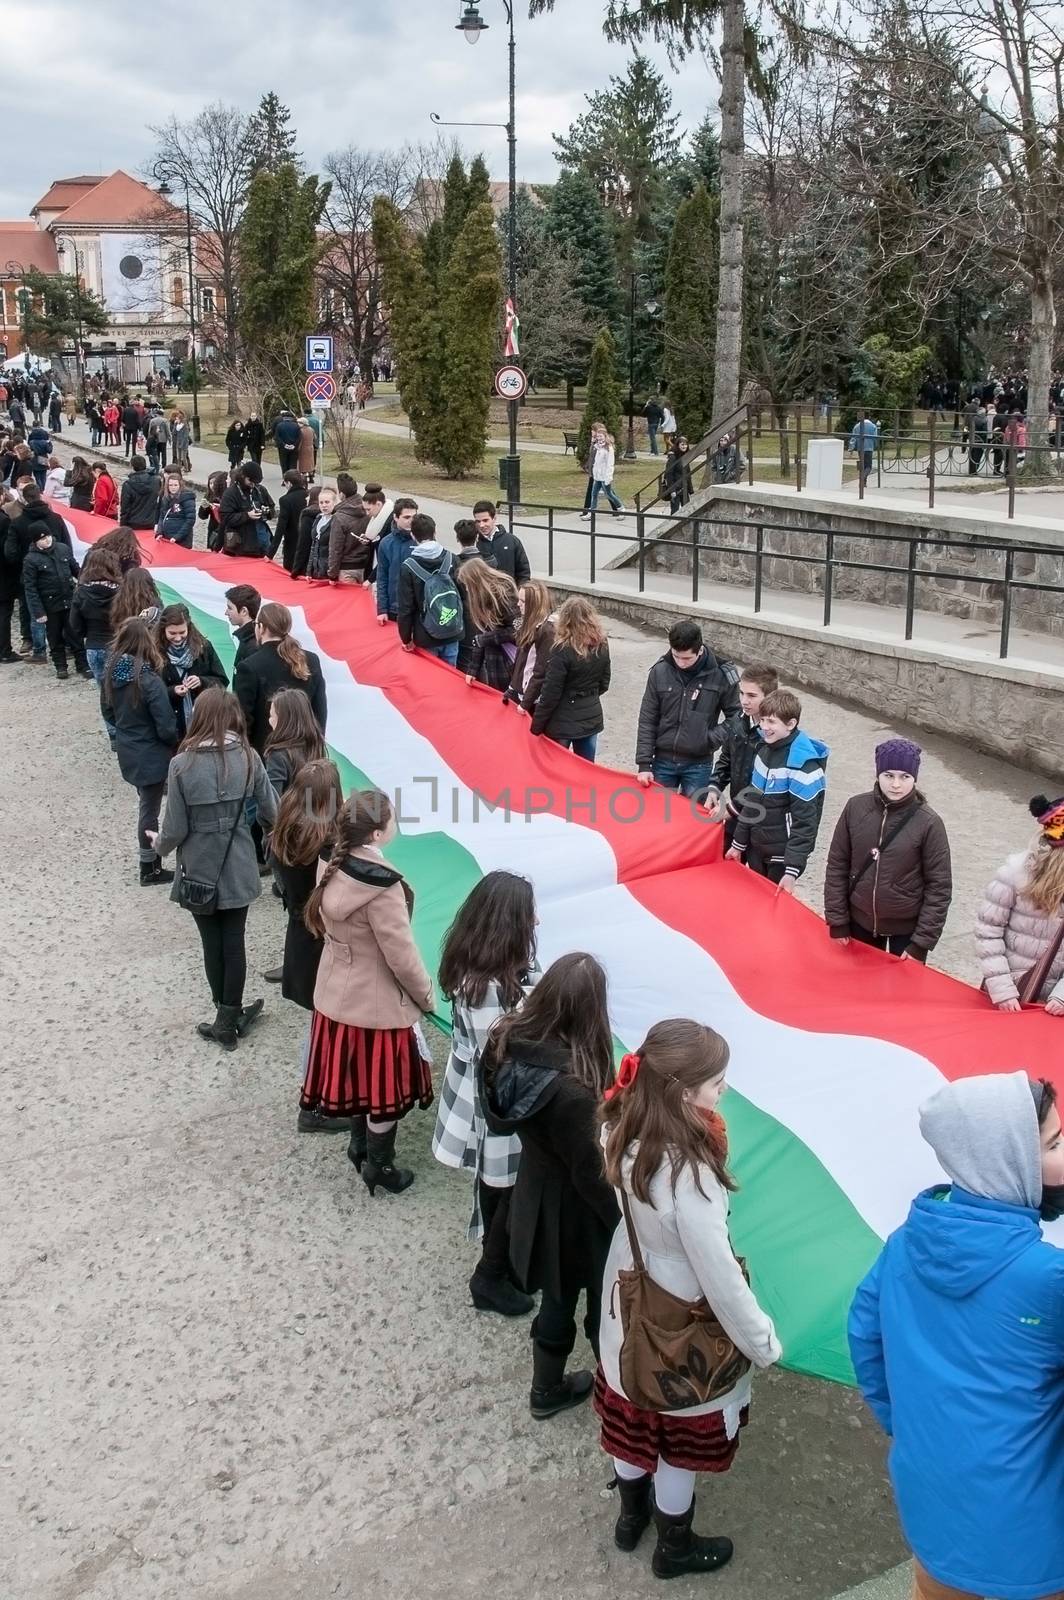 Hungary 's Day , celebrated in Saint George city , Romania!